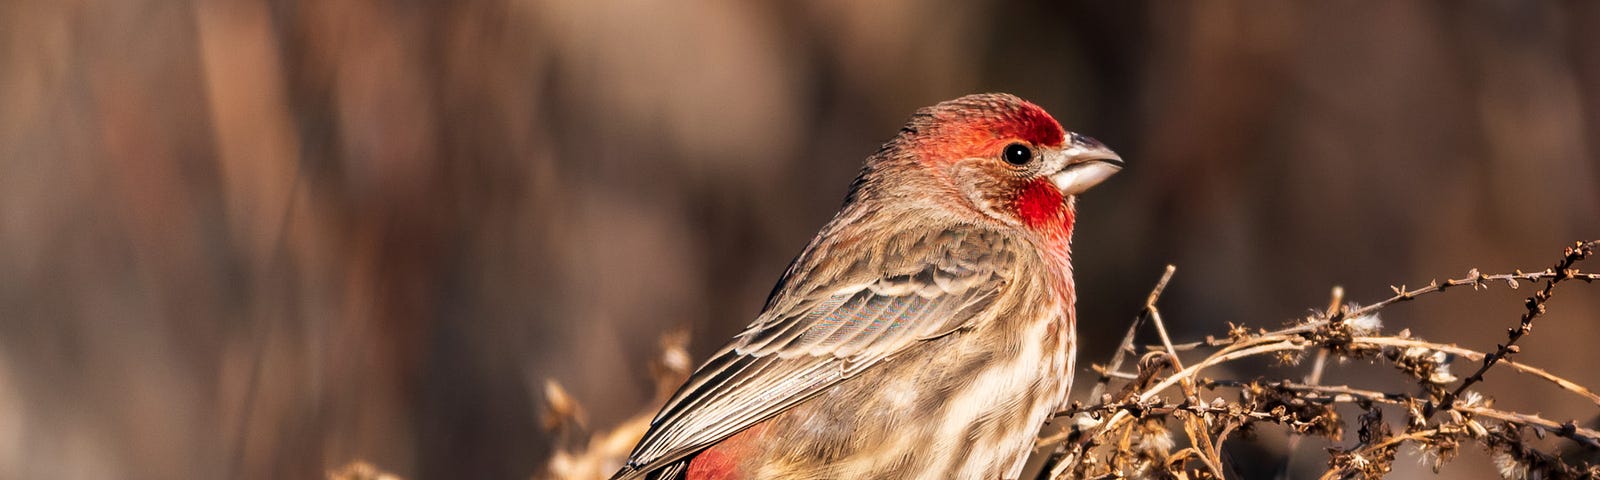 House Finch male perched in dried plants in autumn.